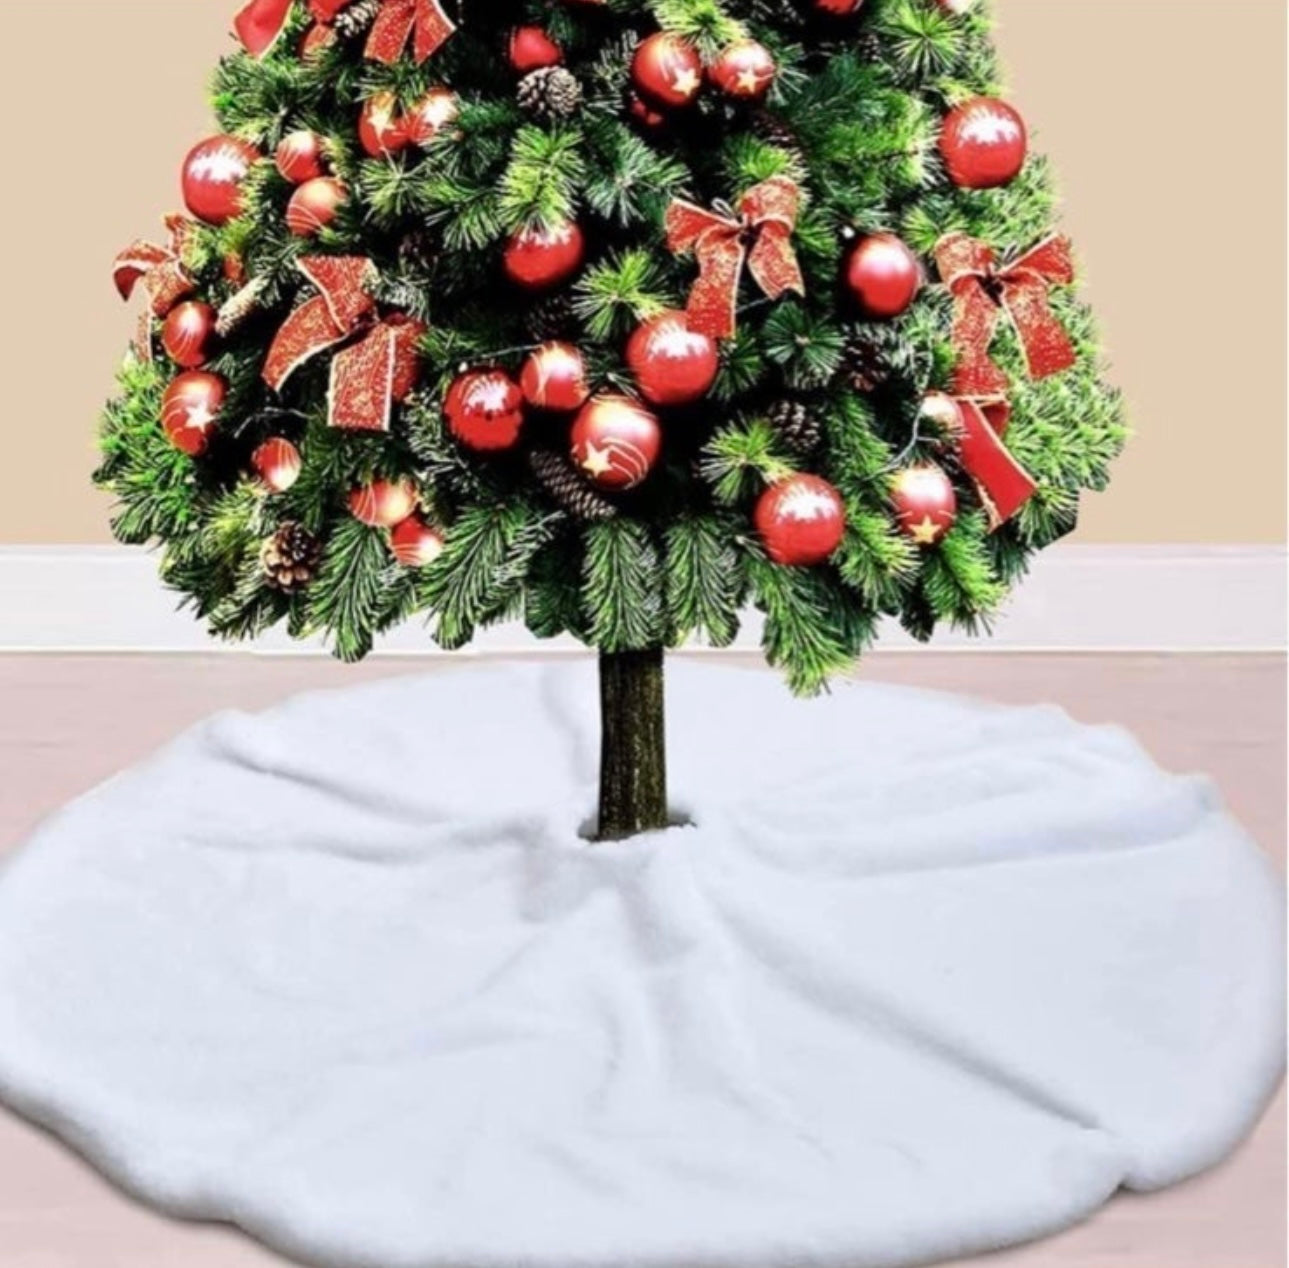 Christmas Tree Skirt 48 inch Large Snowy White Luxury Faux Fur Holiday Party